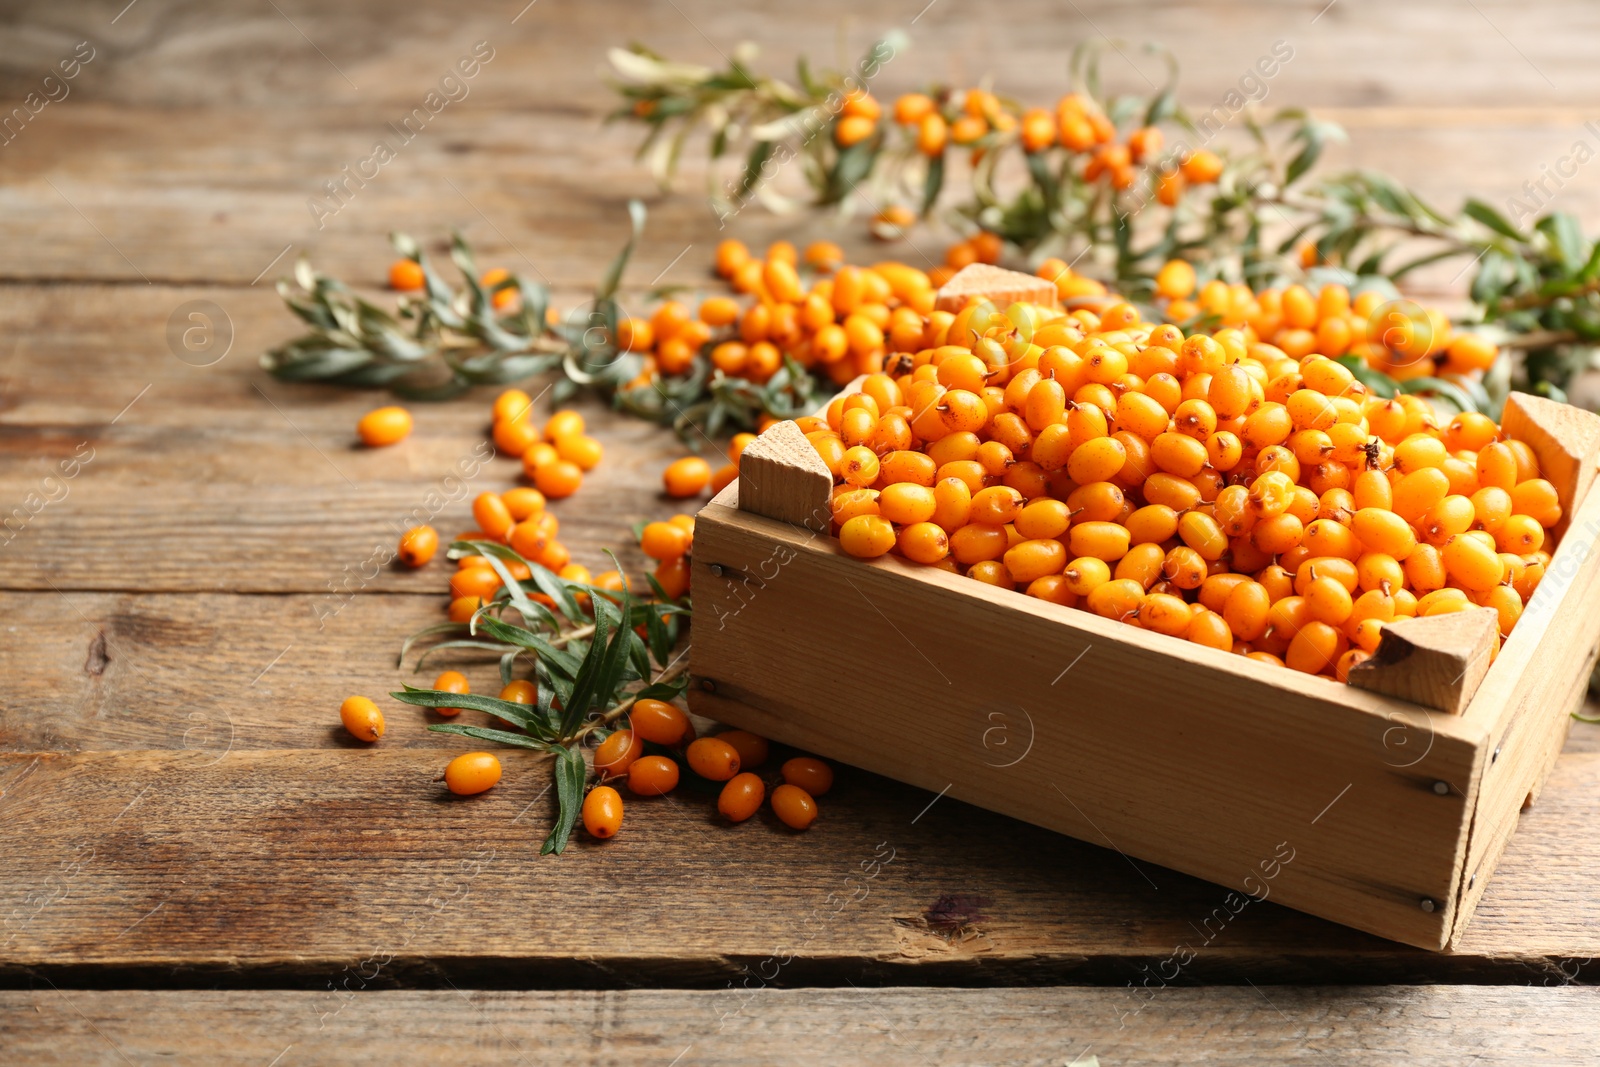 Photo of Ripe sea buckthorn berries on wooden table